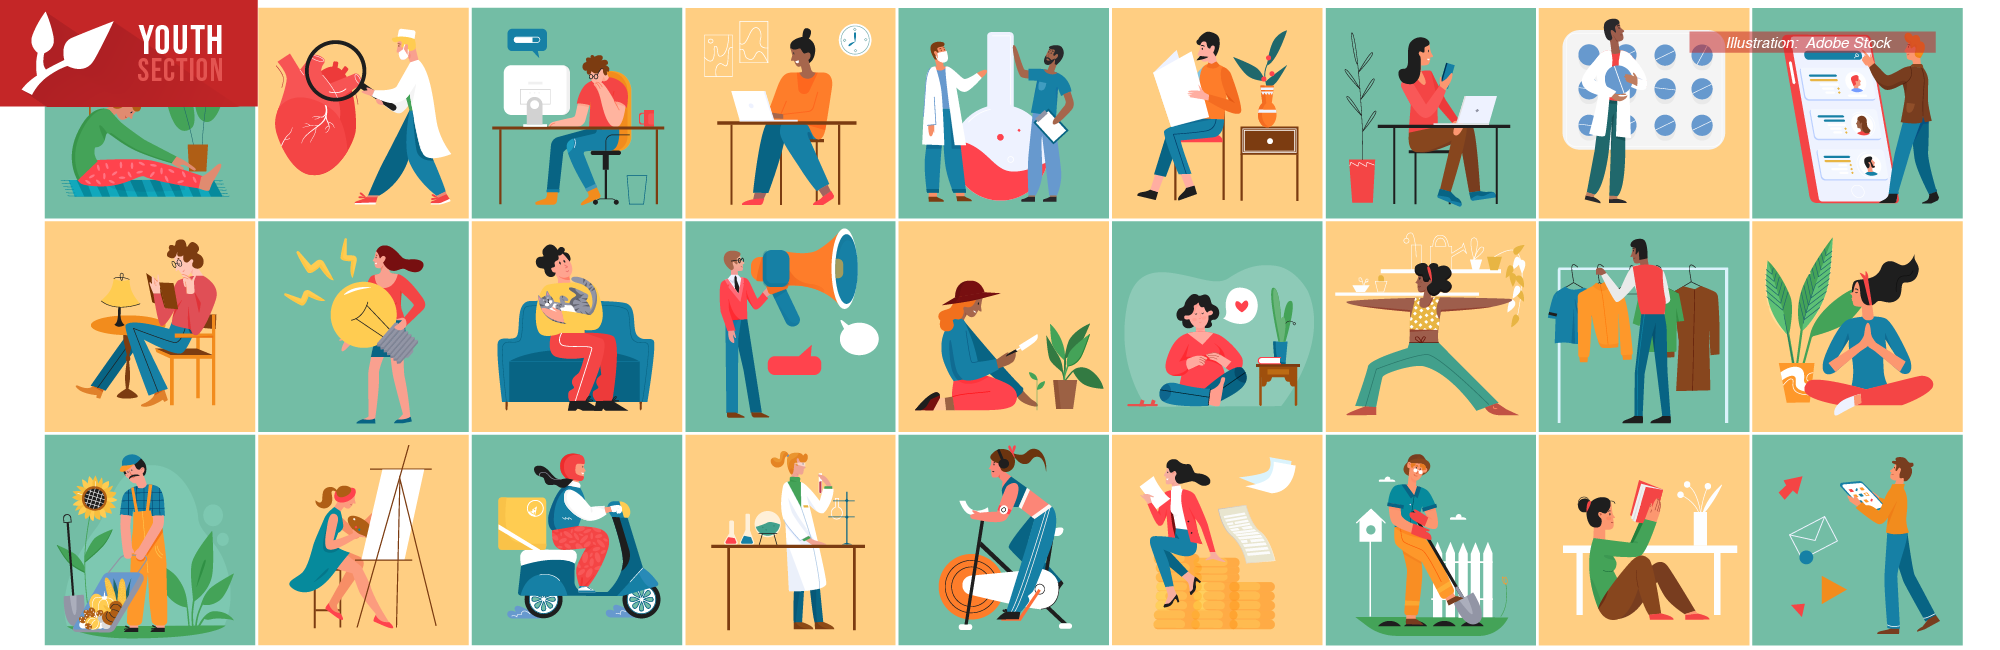 People of different professions in daily life activity vector illustration. Cartoon business, leisure or hobby scenes of woman and man characters, lifestyle concept horizontal banner background